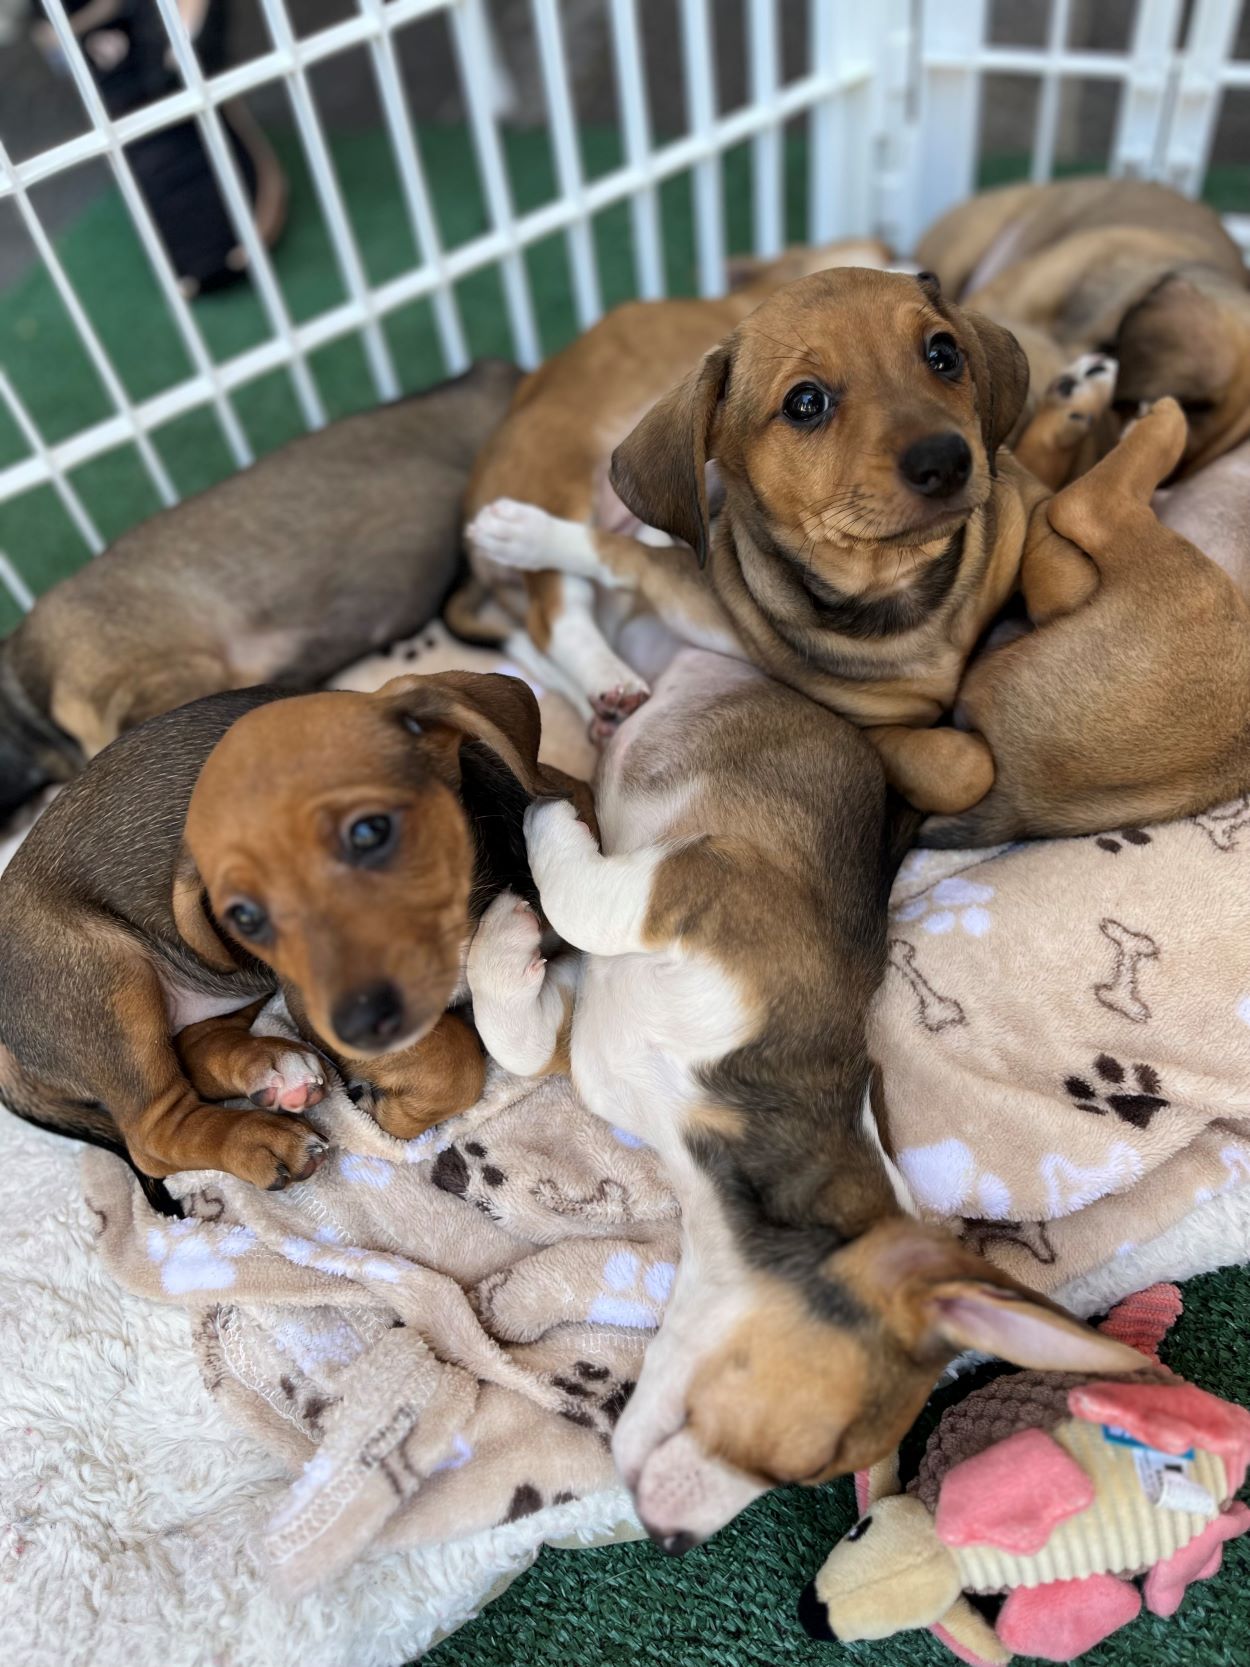 An image of a crate of dogs ready to be adopted.